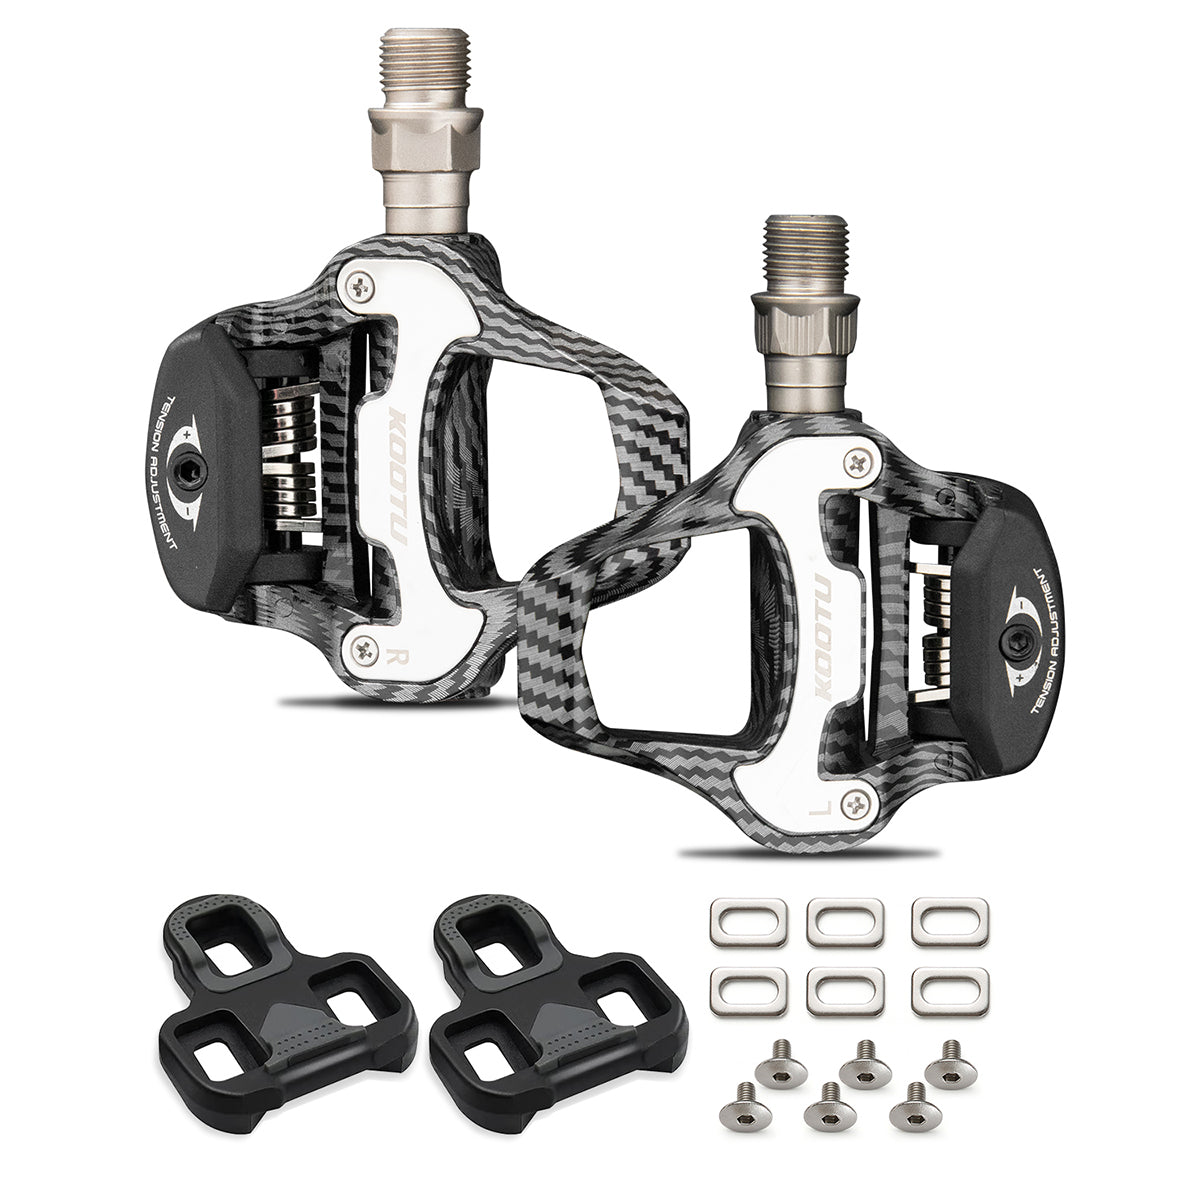 Fuld anspændt ankomme KOOTU Road Bike Pedals Carbon Pattern Clip Pedals For KEO Look Pedals –  KOOTUBIKE